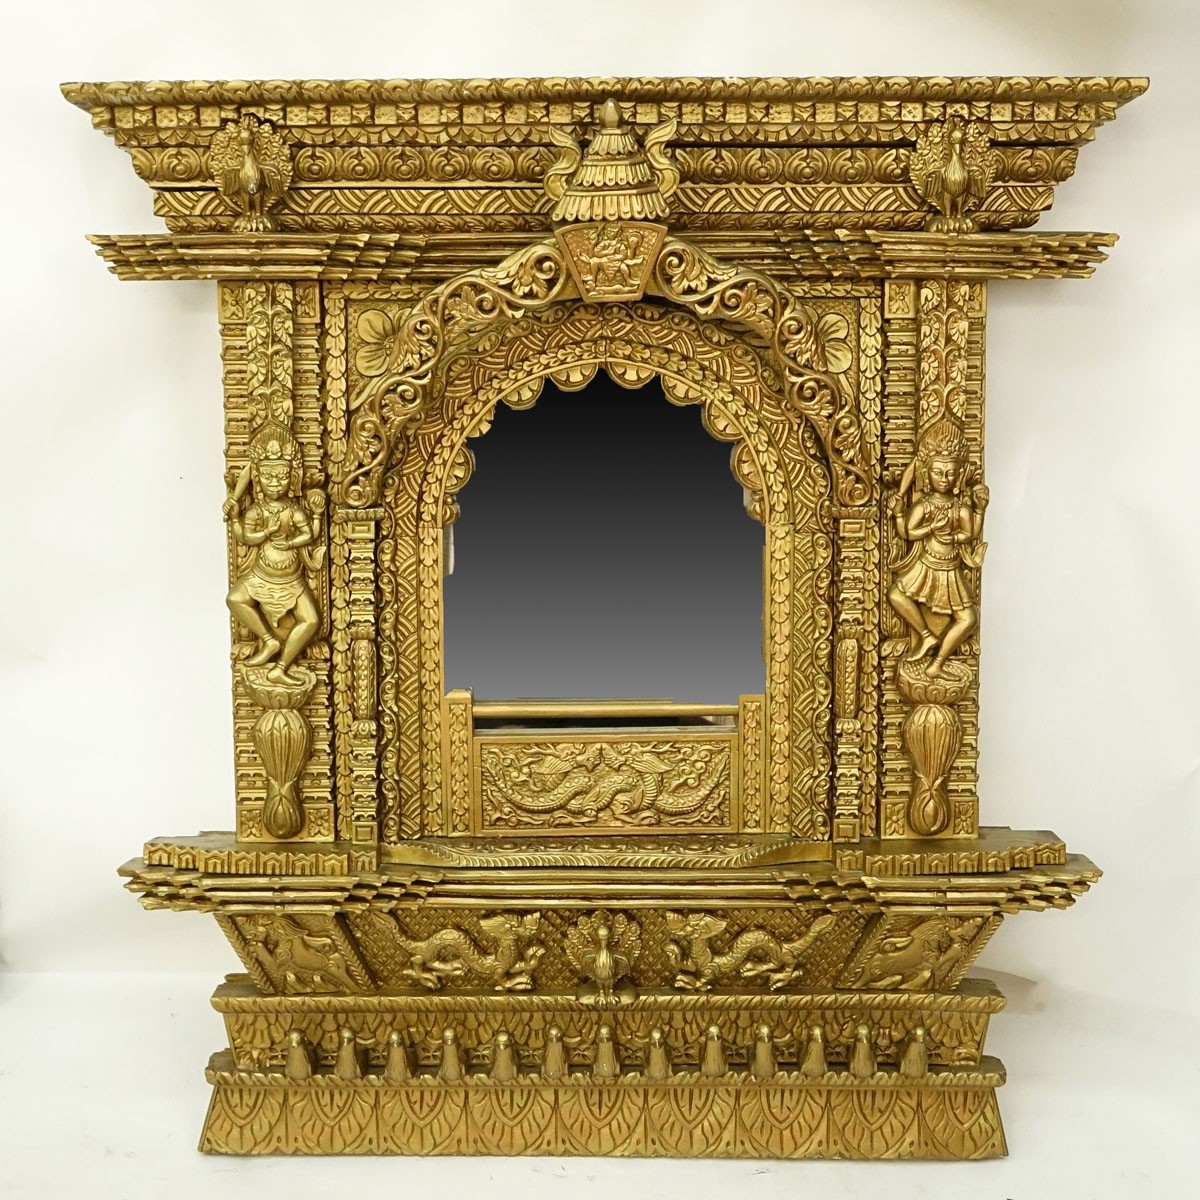 Large Impressive Antique Thai/Burmese Giltwood Carved High Relief Temple Mirror. Intricately carved with figures, birds, dragons, and scroll relief.